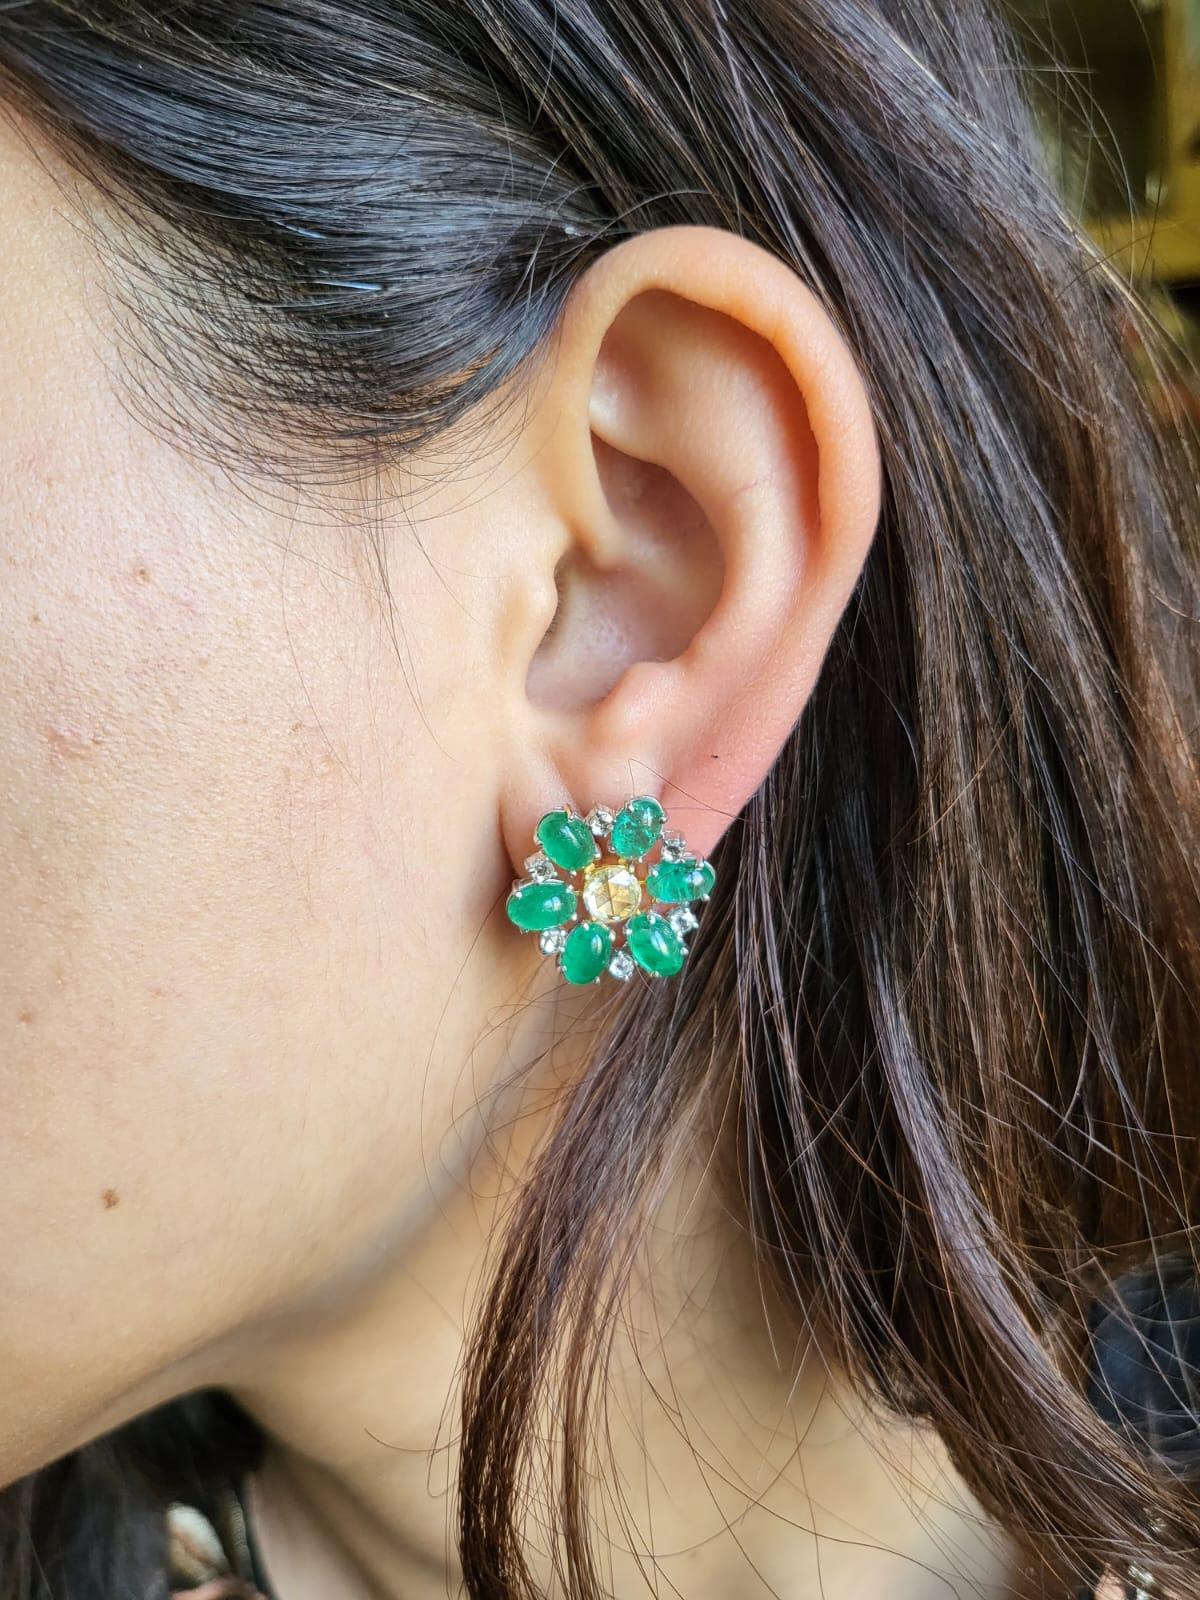 A very beautiful and dainty Emerald Stud Earrings set in 18K White Gold & Diamonds. The weight of the Emerald cabochons is 5.45 carats. The Emeralds are completely natural without any treatment, and is of Zambian origin. The weight of the Rose cut